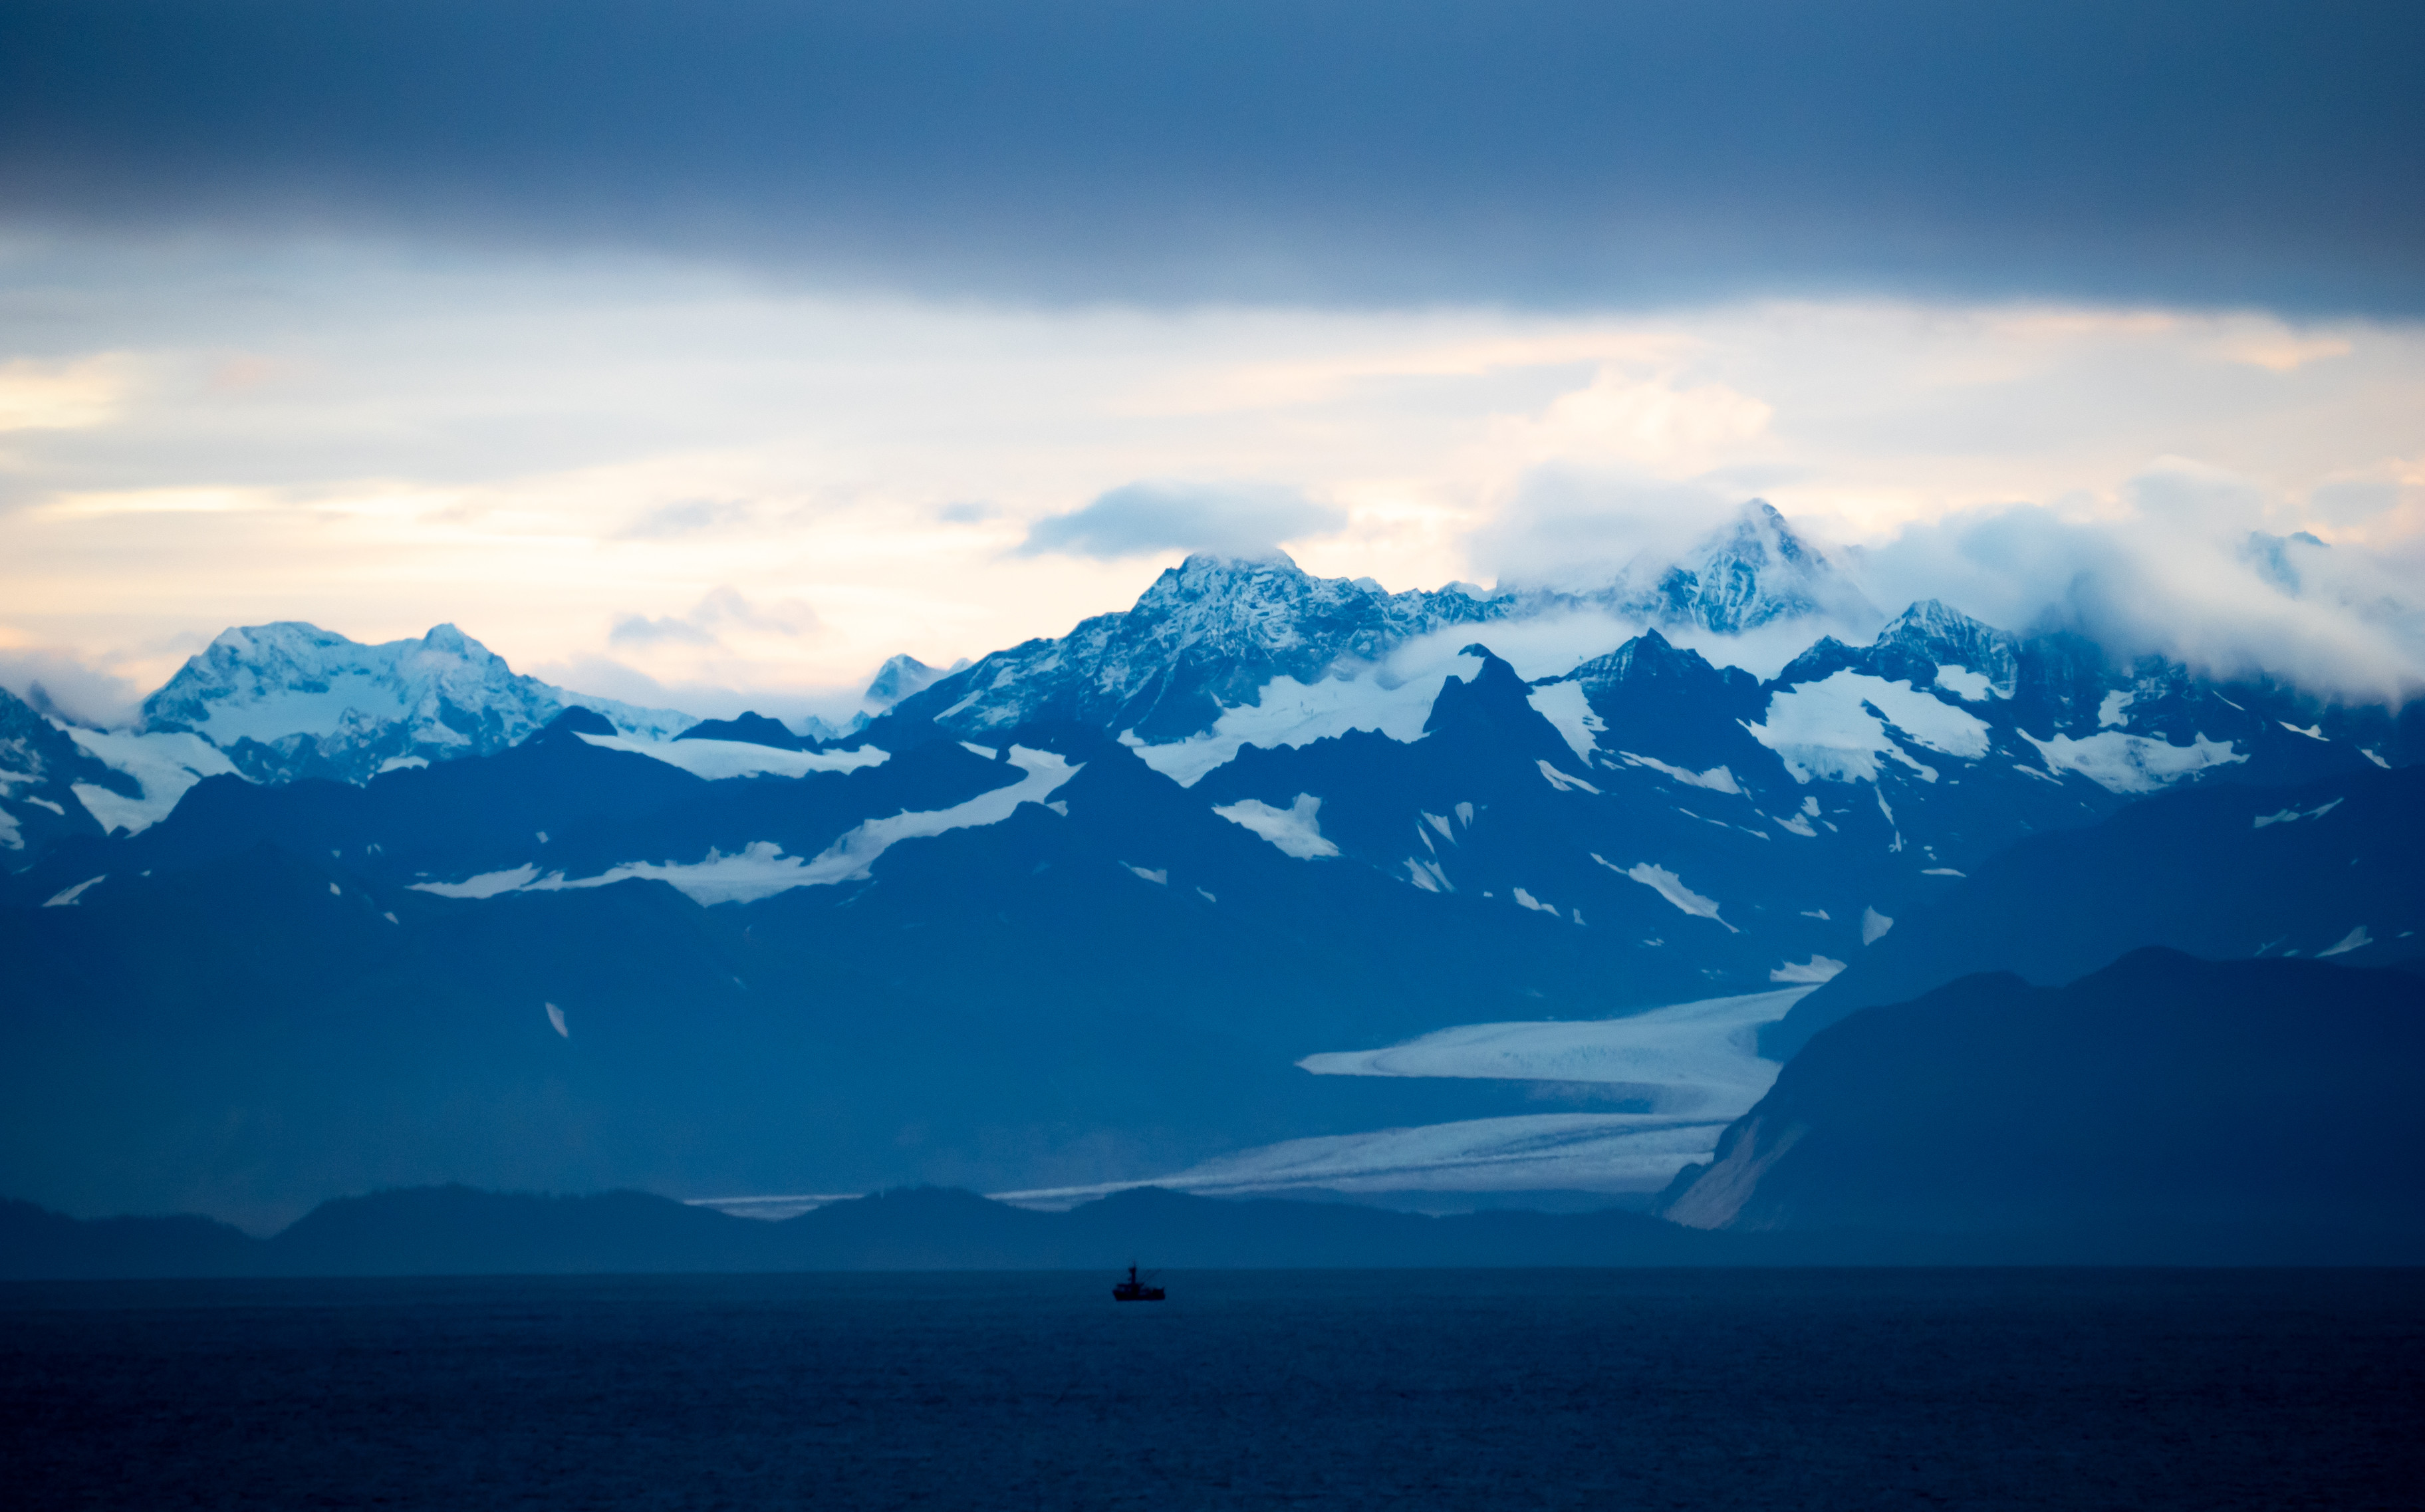 In shades of pre-dawn blue, a craggy range of mountains topped with snow and clouds, a glacier winding down to the sea at the base, where a small fishing boat is  in black silhouette